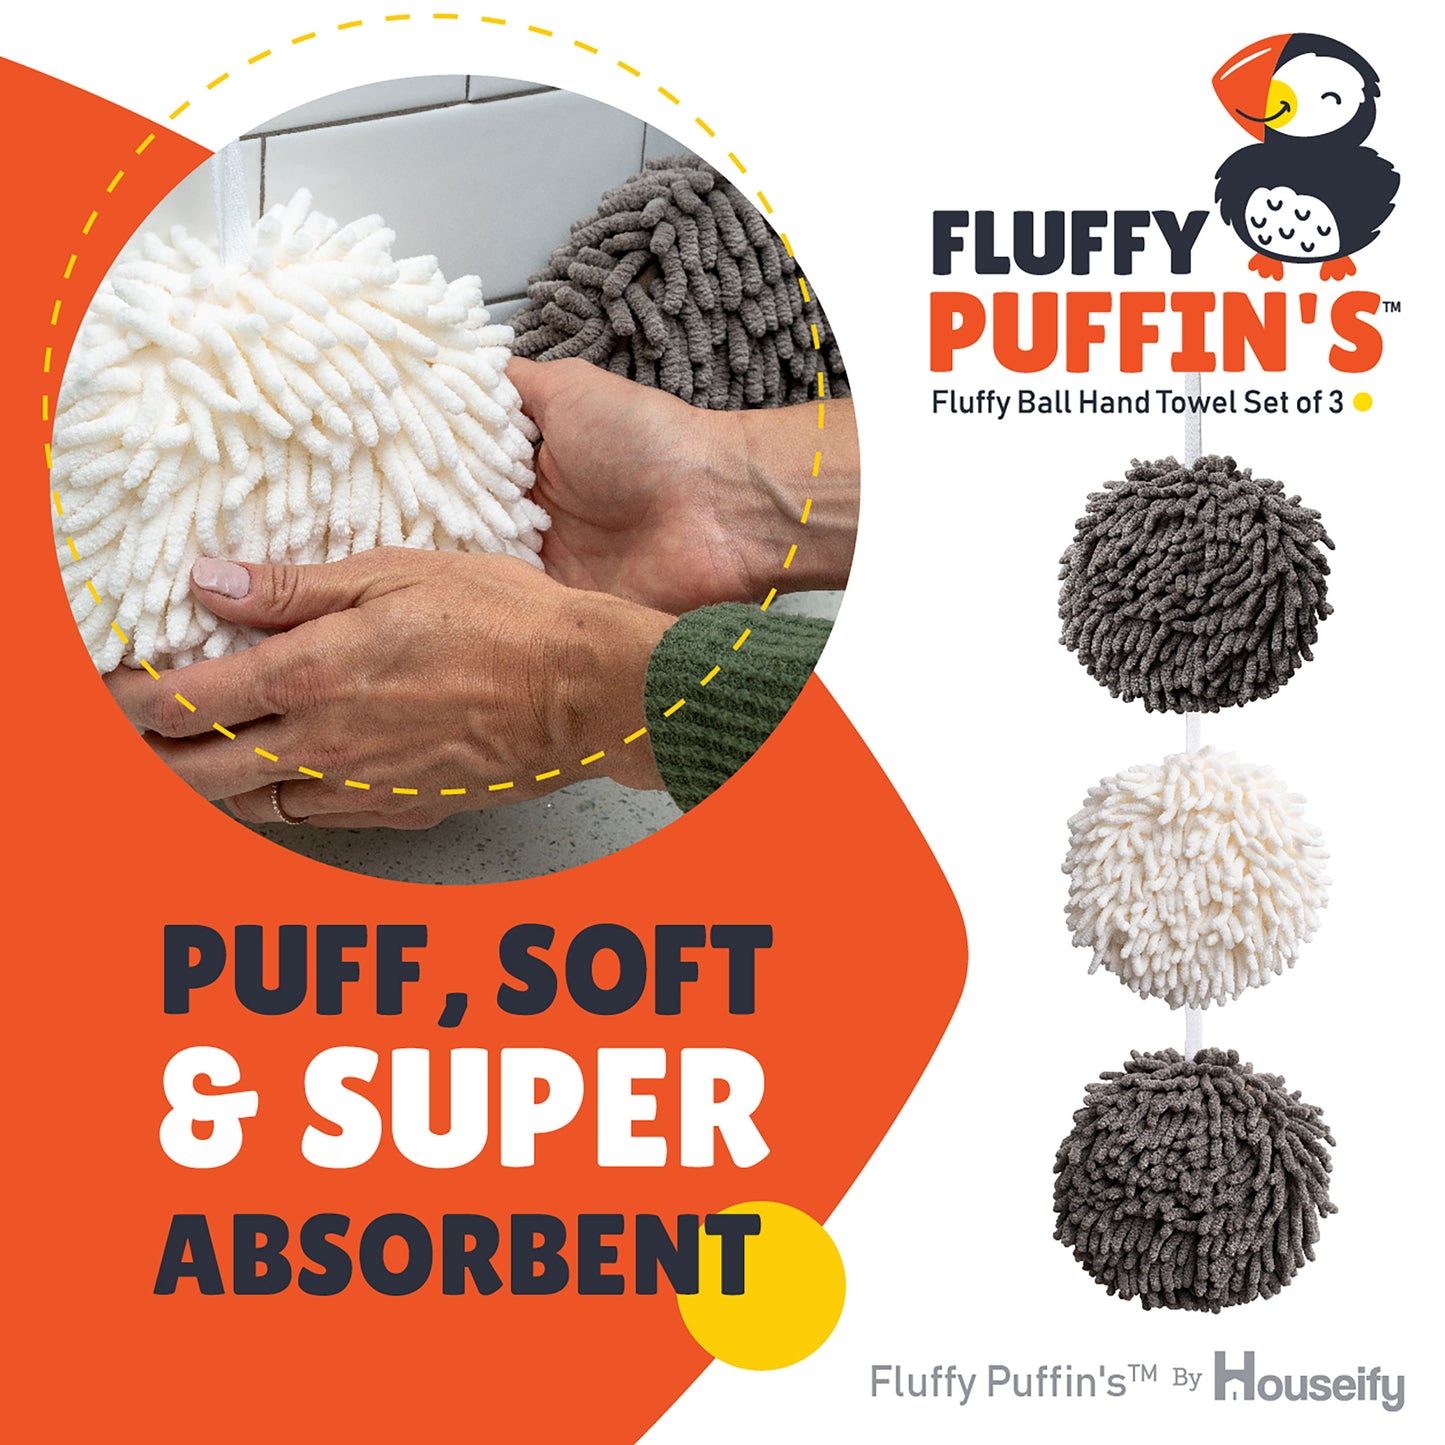 Fluffy Puffin's Fluff Ball Hand Towels, Set of Three, with Wall Hook Attachments